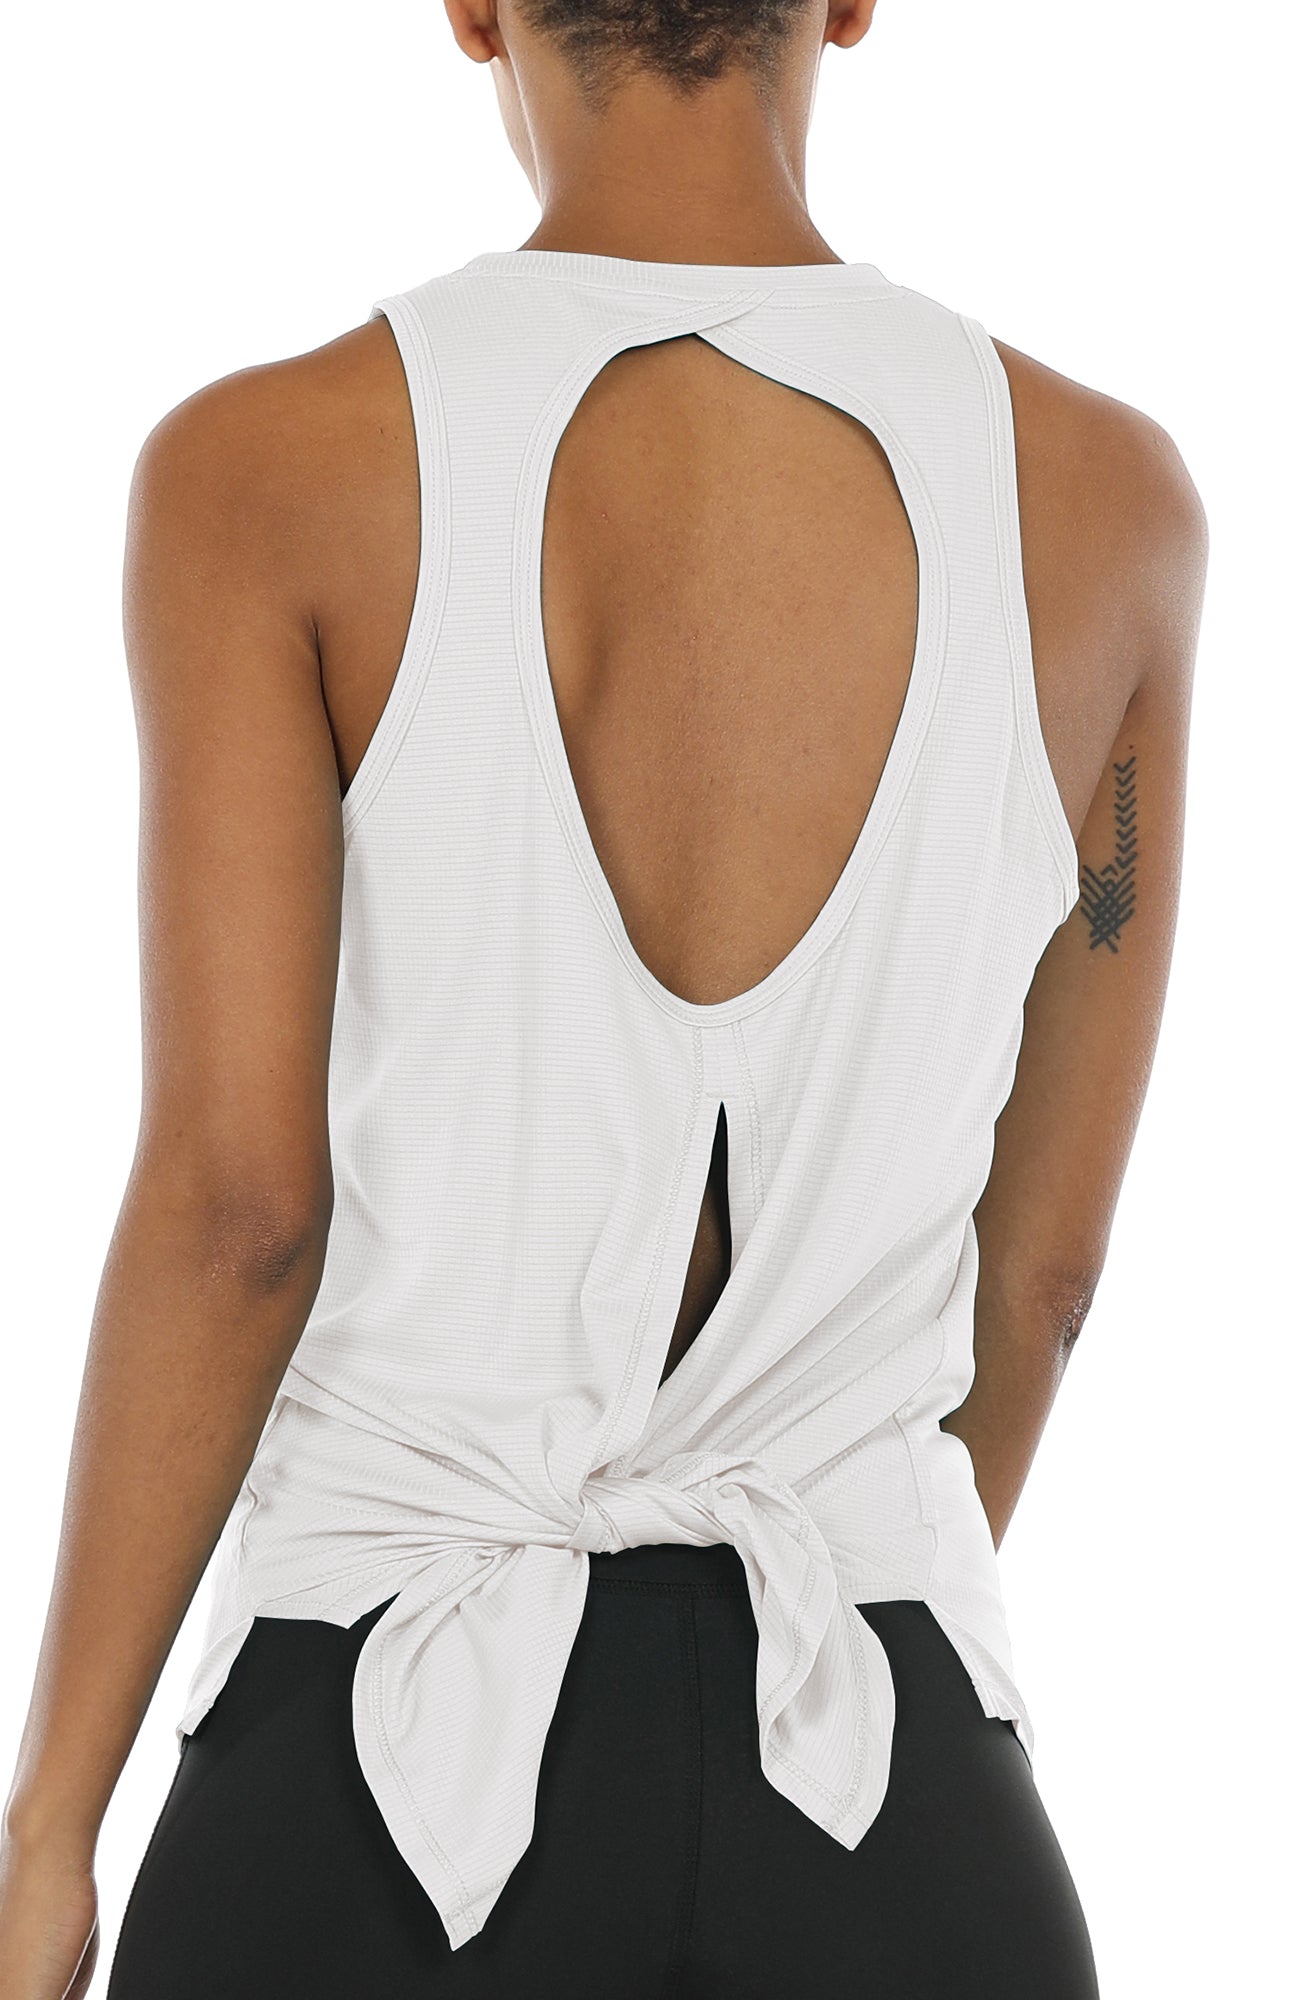 Open-back Camisole Top - Gray - Ladies